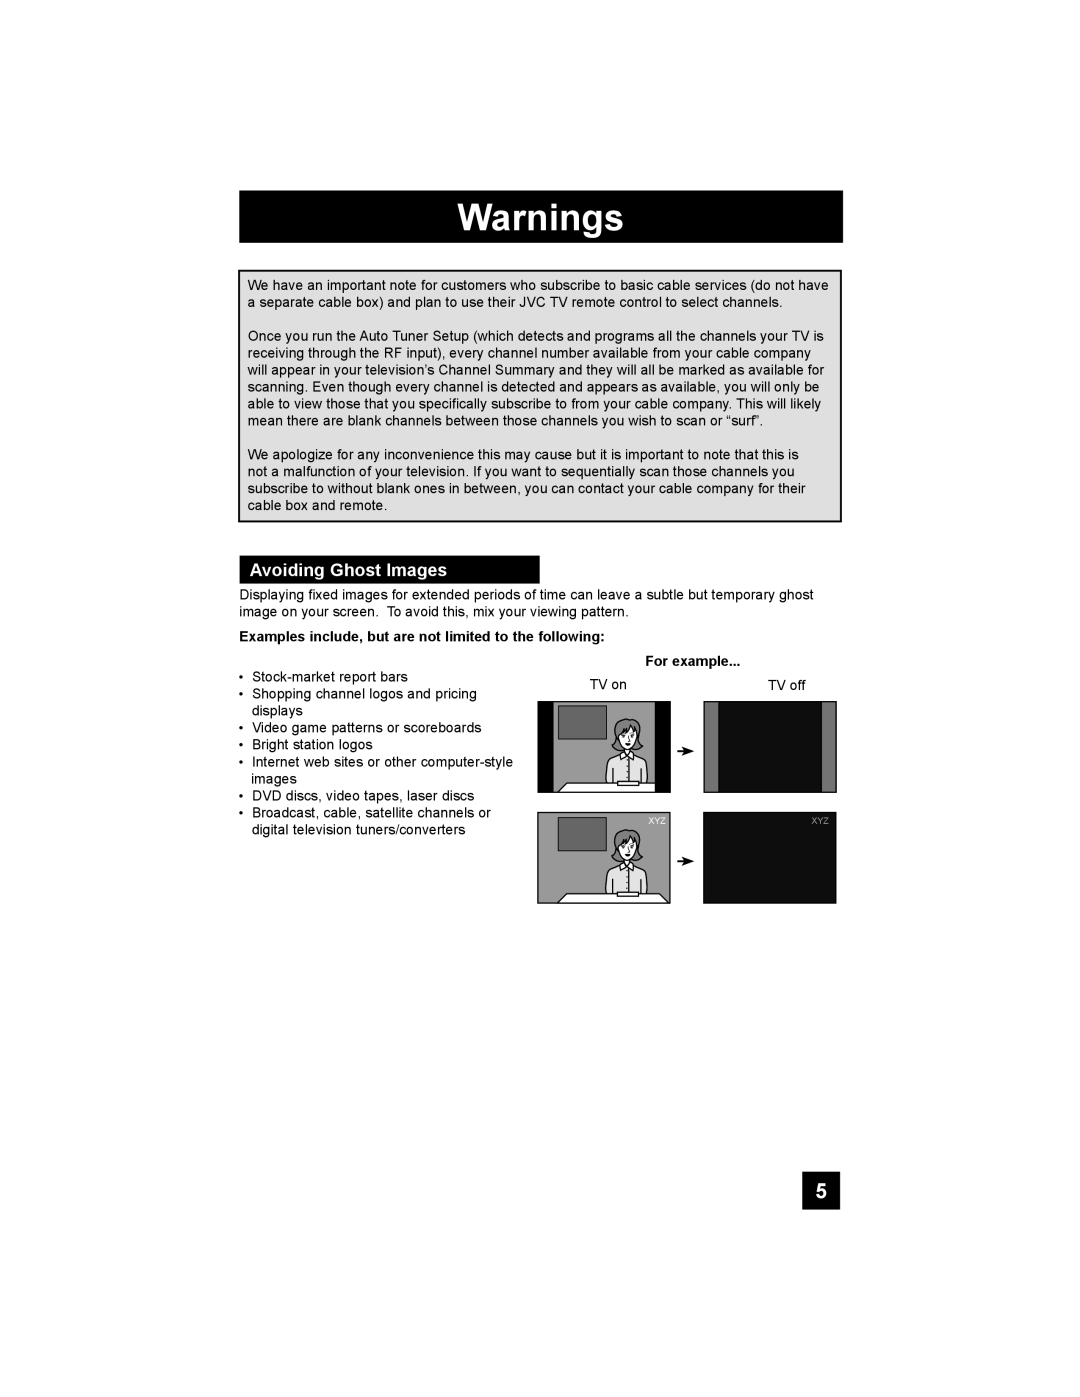 JVC LT-37X898 manual Warnings, Avoiding Ghost Images, Examples include, but are not limited to the following, For example 